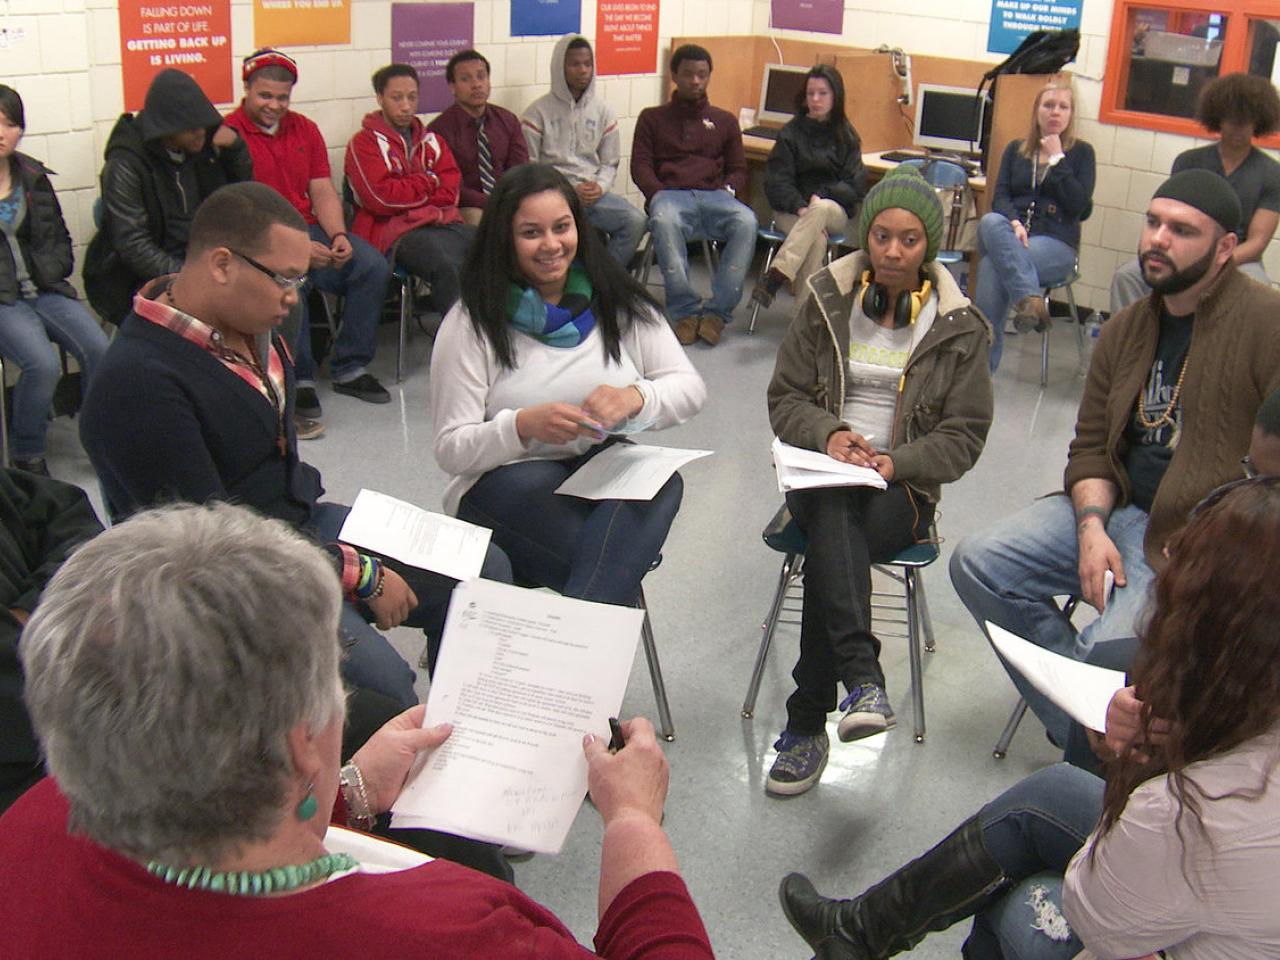 A multiracial group of people sit in a circle at a restorative justice training. More people sit in chairs lining the walls around the inner circle.